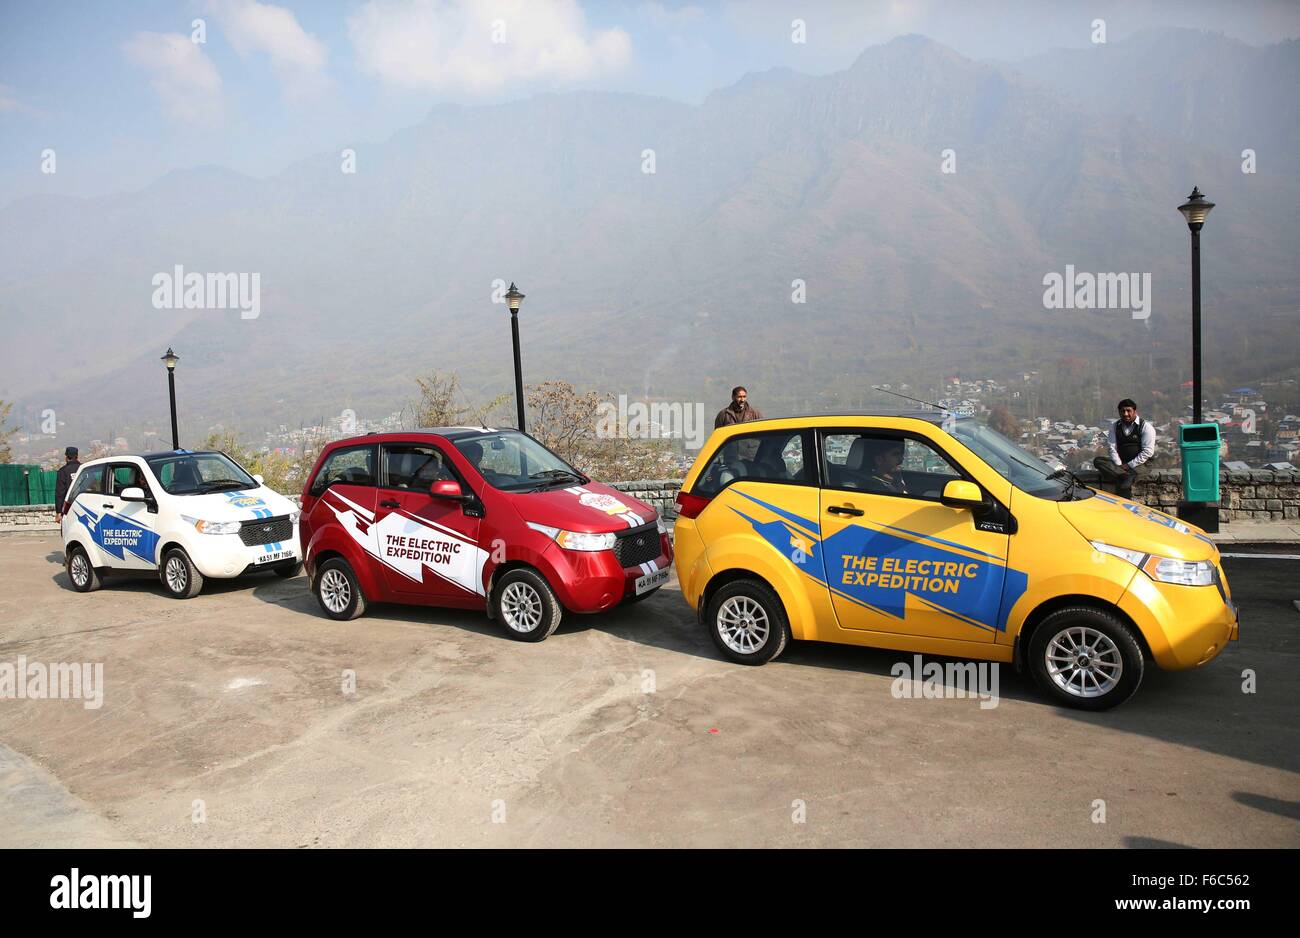 Srinagar, Indian-controlled Kashmir. 16th Nov, 2015. Electric cars are ready to set out during India's first all-electric car expedition in Srinagar, summer capital of Indian-controlled Kashmir, Nov. 16, 2015. The first all-electric car expedition organized by Mahindra Reva Electric Vehicles Pvt Limited from Kashmir to Kanyakumari will cover a distance of over 5000 kilometers across 52 locations over a month. © Javed Dar/Xinhua/Alamy Live News Stock Photo